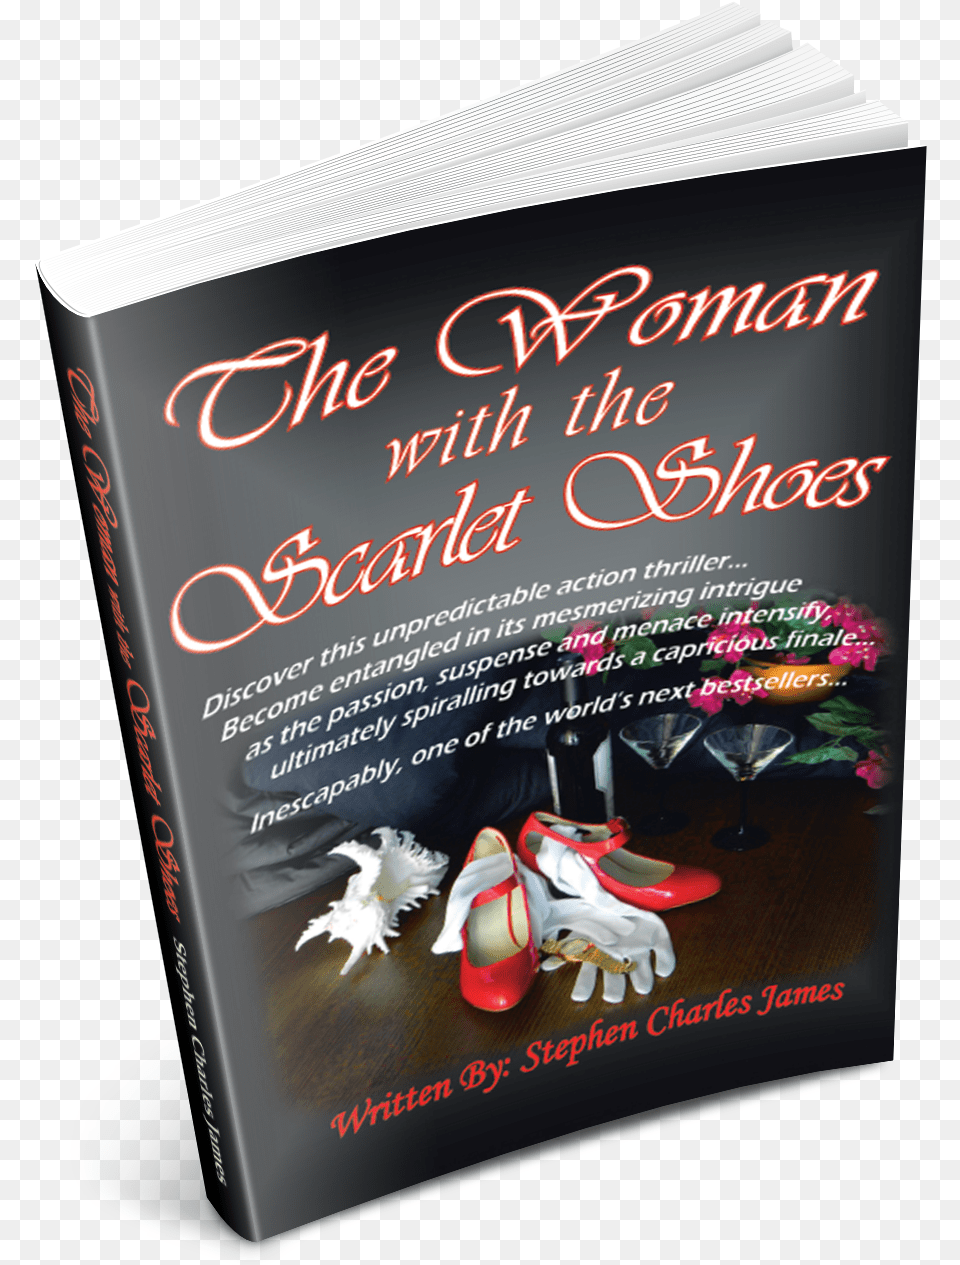 The Woman Woman With The Scarlet Shoes, Book, Publication, Advertisement, Poster Png Image